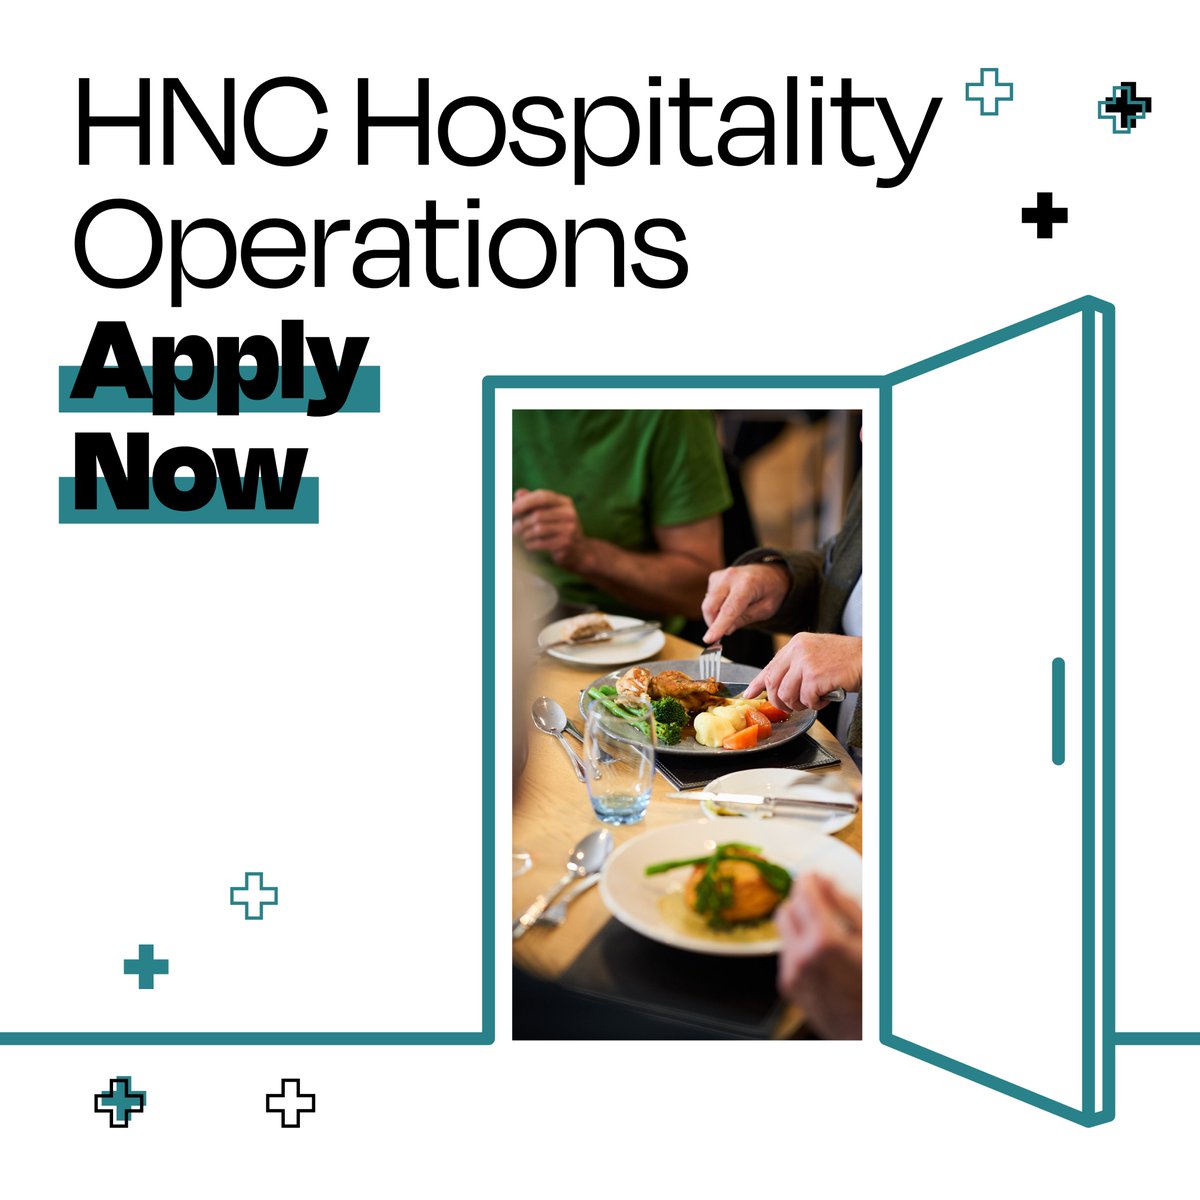 Hospitality is a growth industry and needs well-trained staff to work in hotels, restaurants, pubs, leisure and travel. Our HNC introduces you to the supervisory skills required for a successful career.

Our doors are always open➕#ApplyNow 👉 tinyurl.com/565crfv5

@ThinkUHI